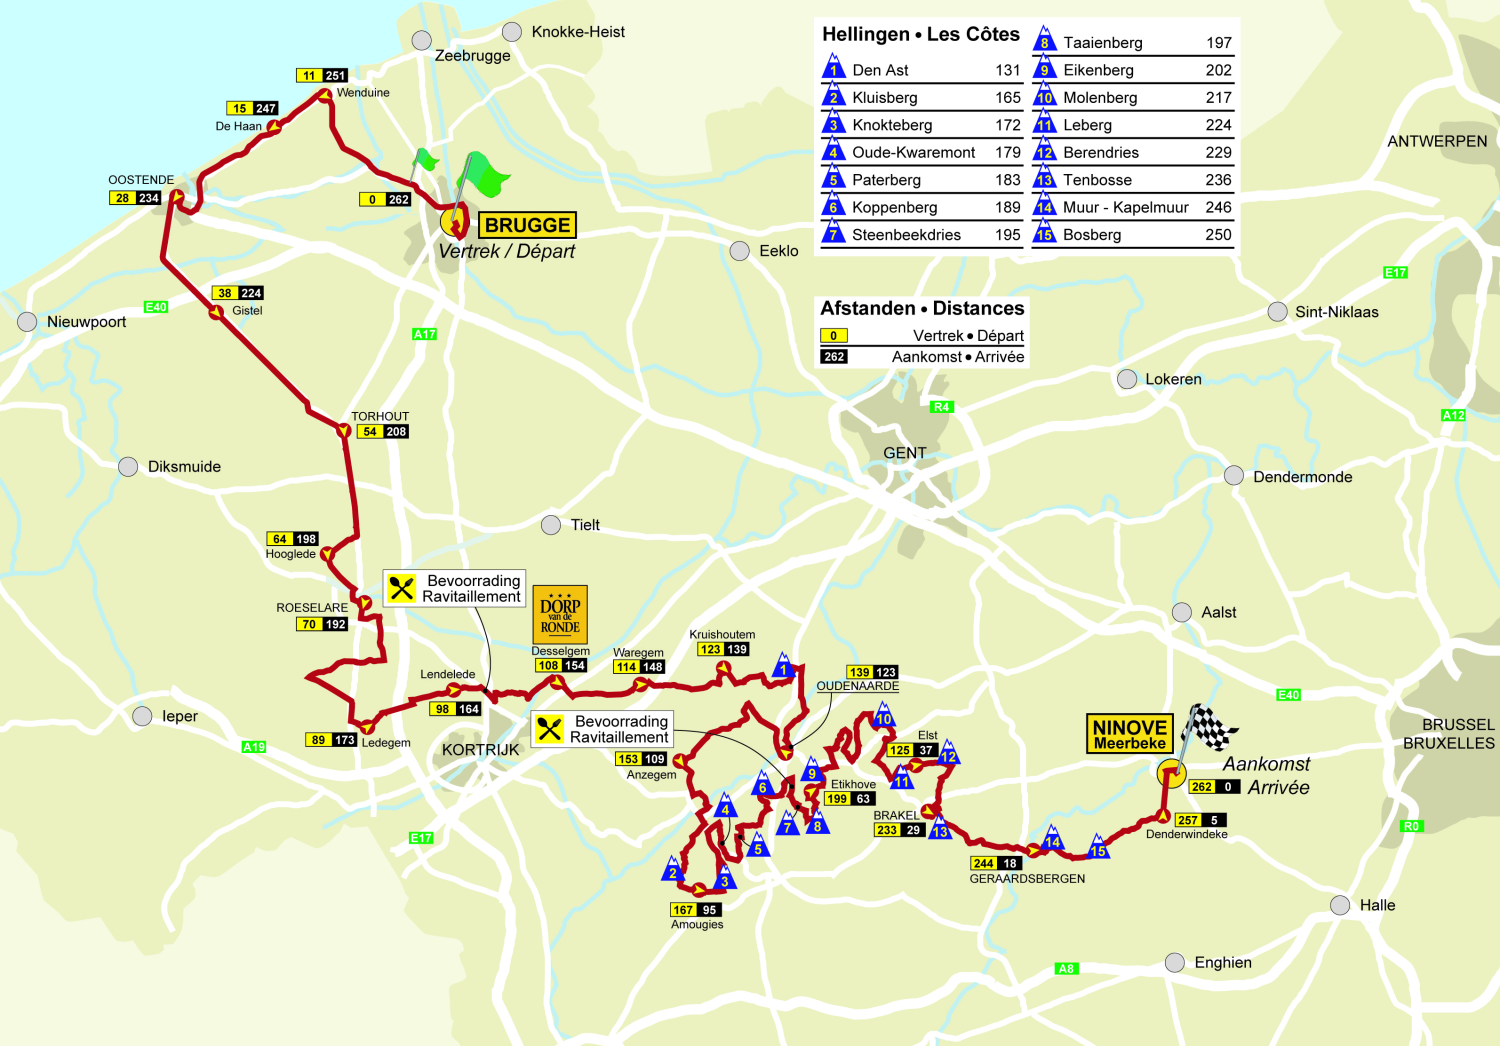 2010 Tour of Flanders Live Video, Route, Teams, Results, Photos, TV aka